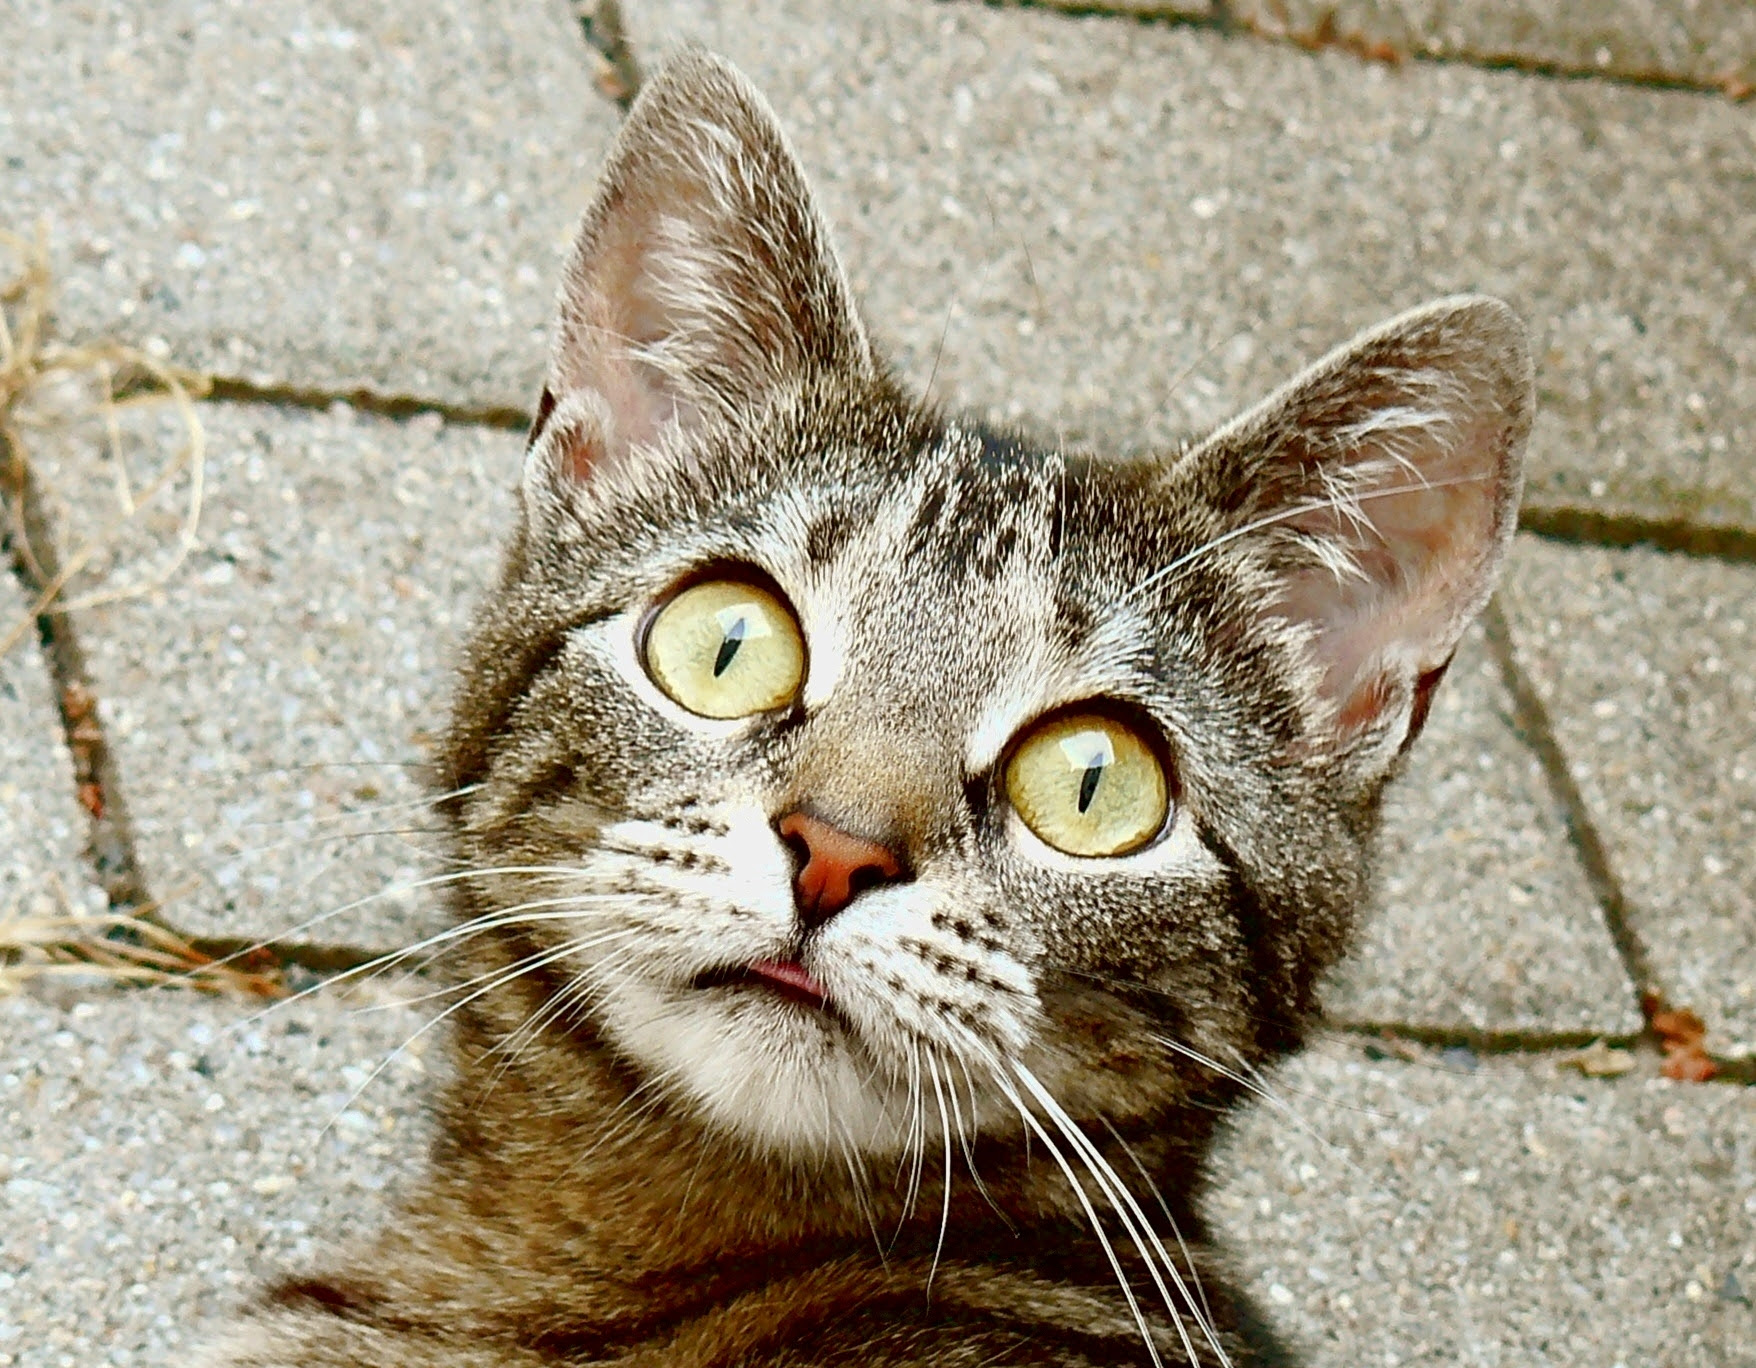 http://upload.wikimedia.org/wikipedia/commons/f/f9/Surprised_young_cat.JPG